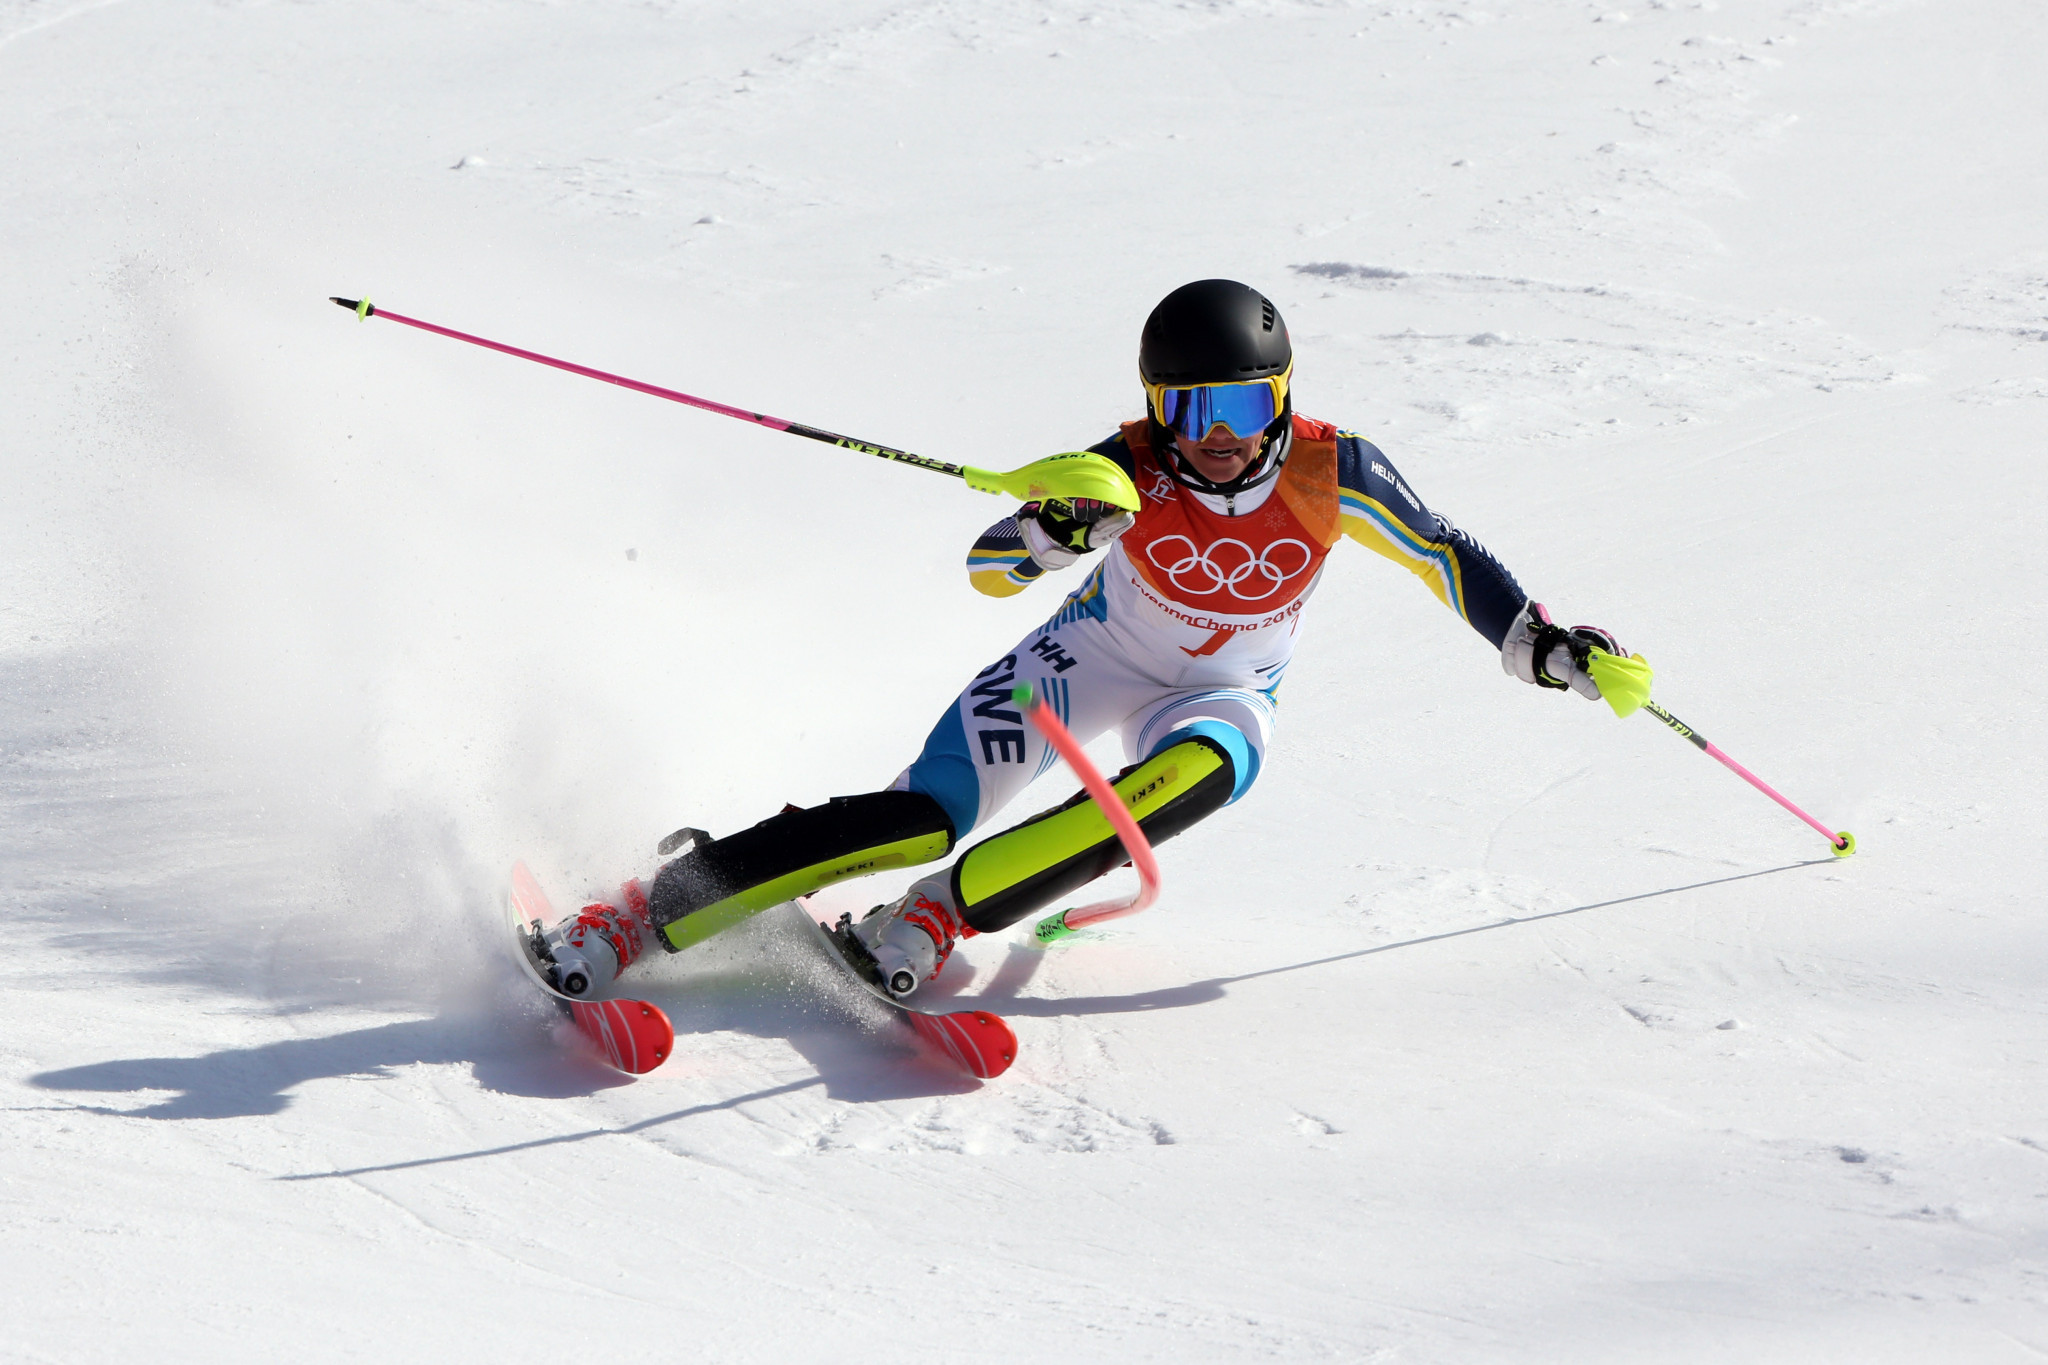 Sweden's Frida Hansdotter produced a storming second run to top the women's slalom podium ©Getty Images